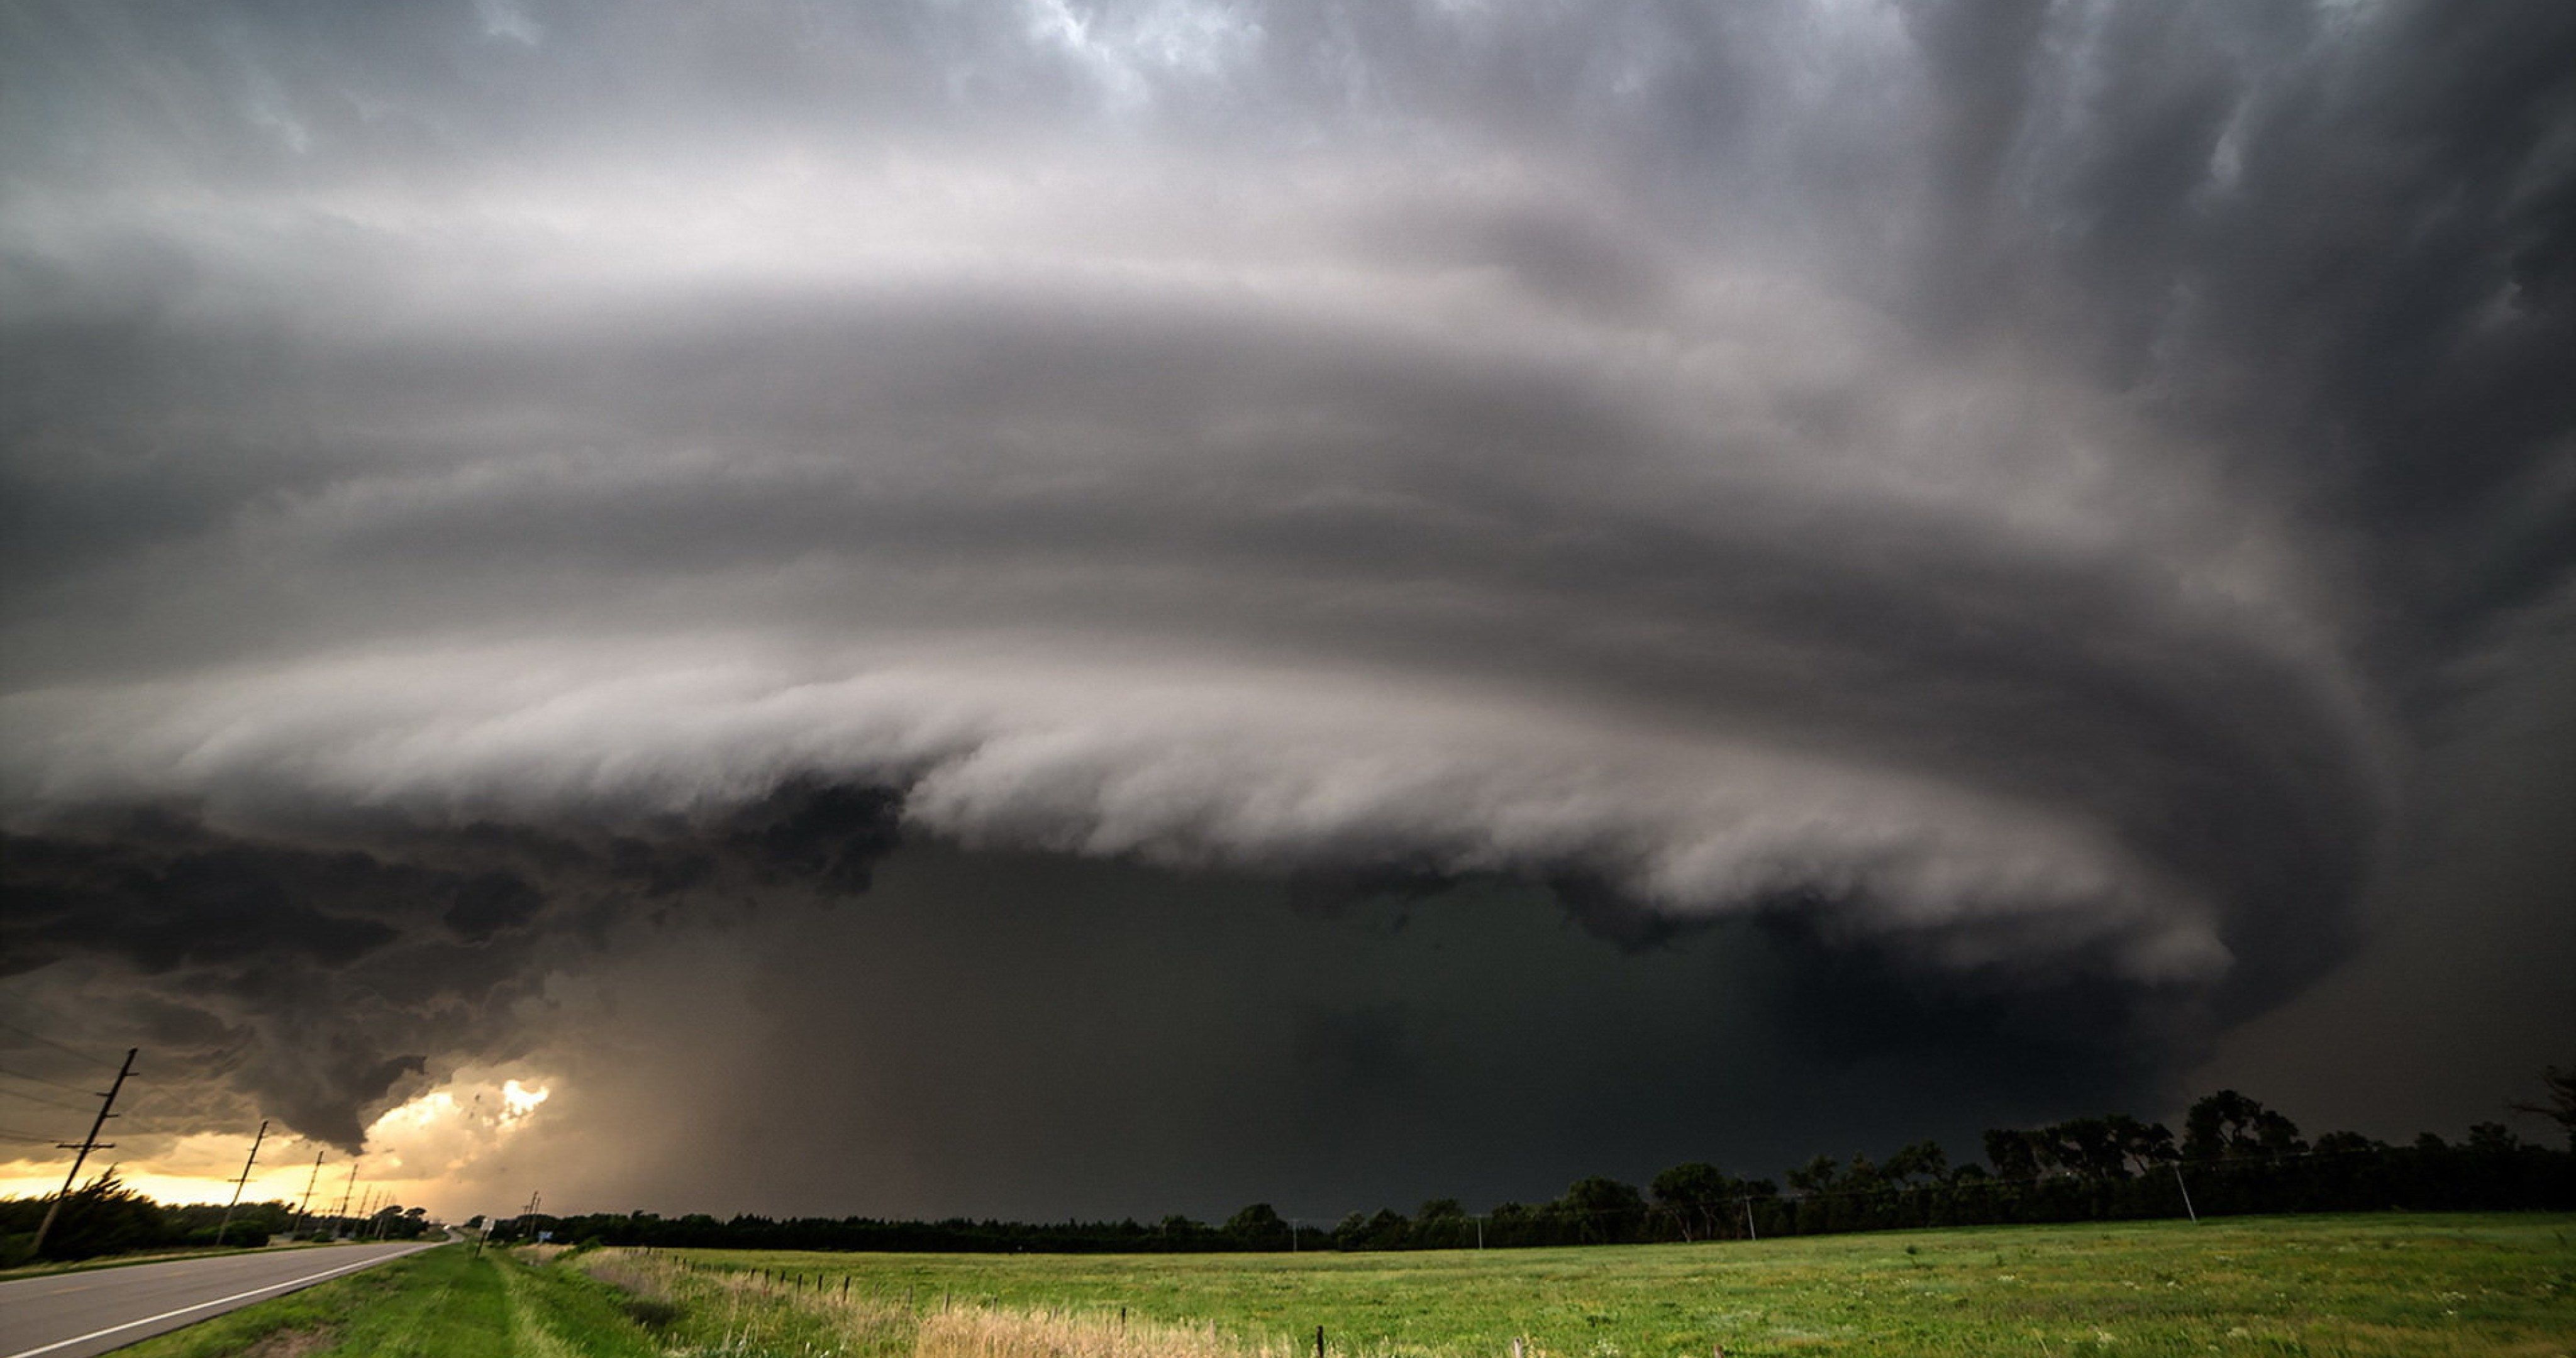 Hd Wallpapers Of Storms